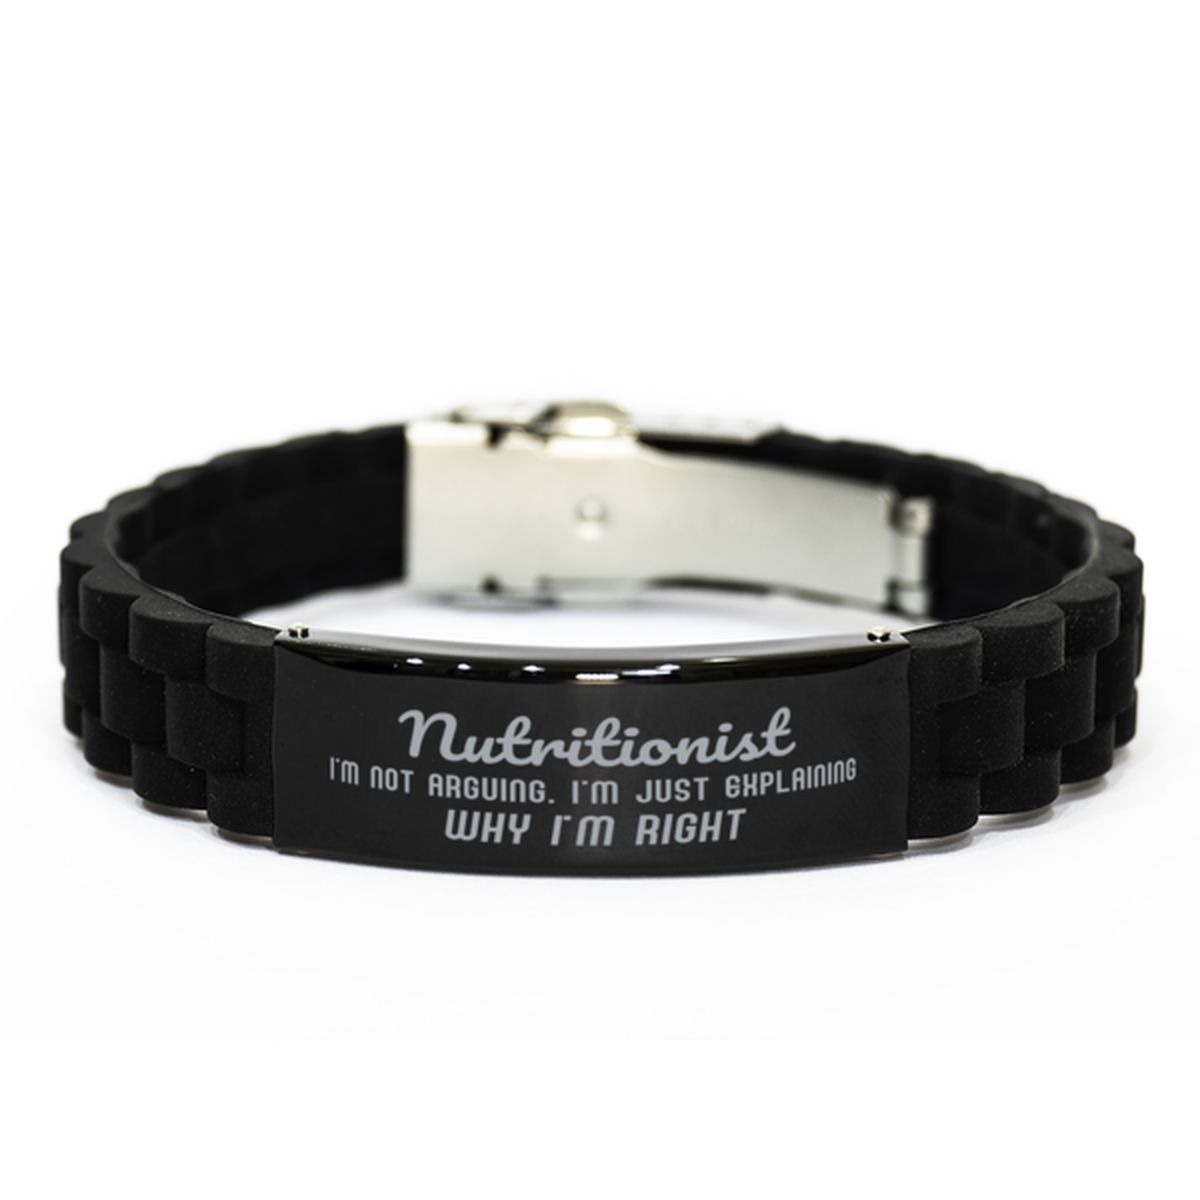 Nutritionist I'm not Arguing. I'm Just Explaining Why I'm RIGHT Black Glidelock Clasp Bracelet, Funny Saying Quote Nutritionist Gifts For Nutritionist Graduation Birthday Christmas Gifts for Men Women Coworker